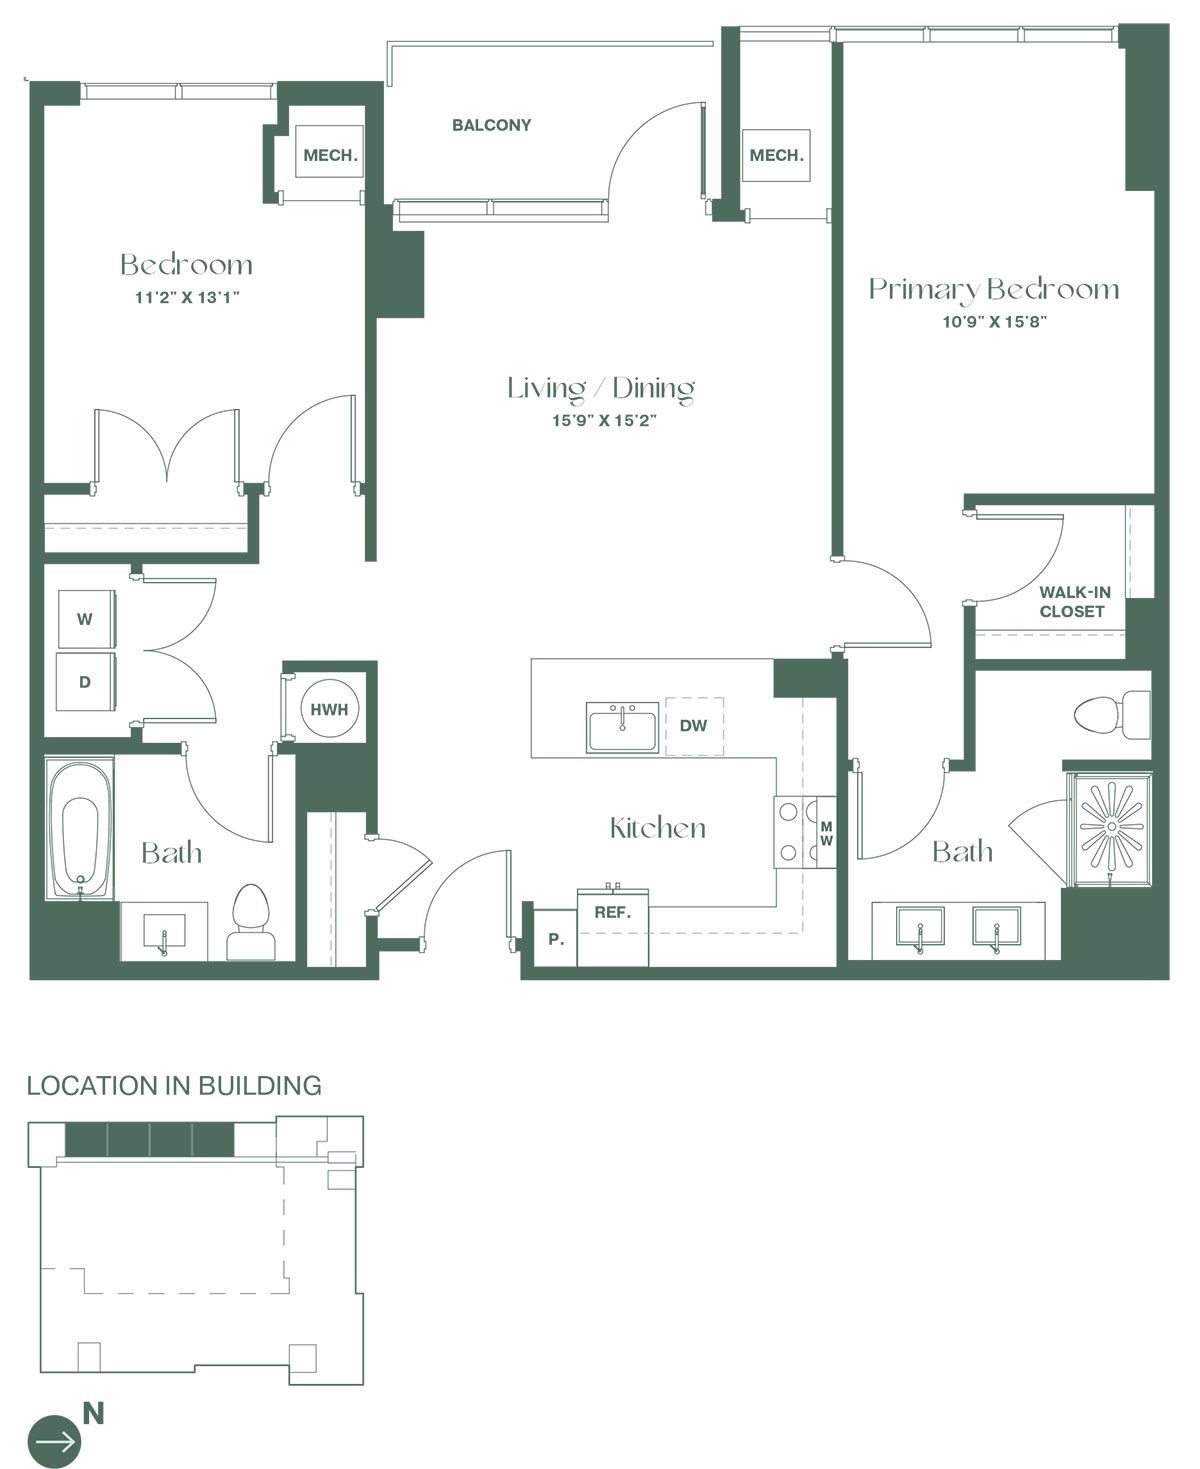 This floorplan for a two-bedroom, two-bathroom apartment at RVR at Xchange opens into a fully equipped kitchen with a dishwasher and pantry. Past the kitchen is a living and dining area with a balcony, the living and dining room, a full bathroom and a bedroom. To the right of the living and dining room is the entrance to the primary bedroom suite, with a large walk-in closet, and a full bathroom.